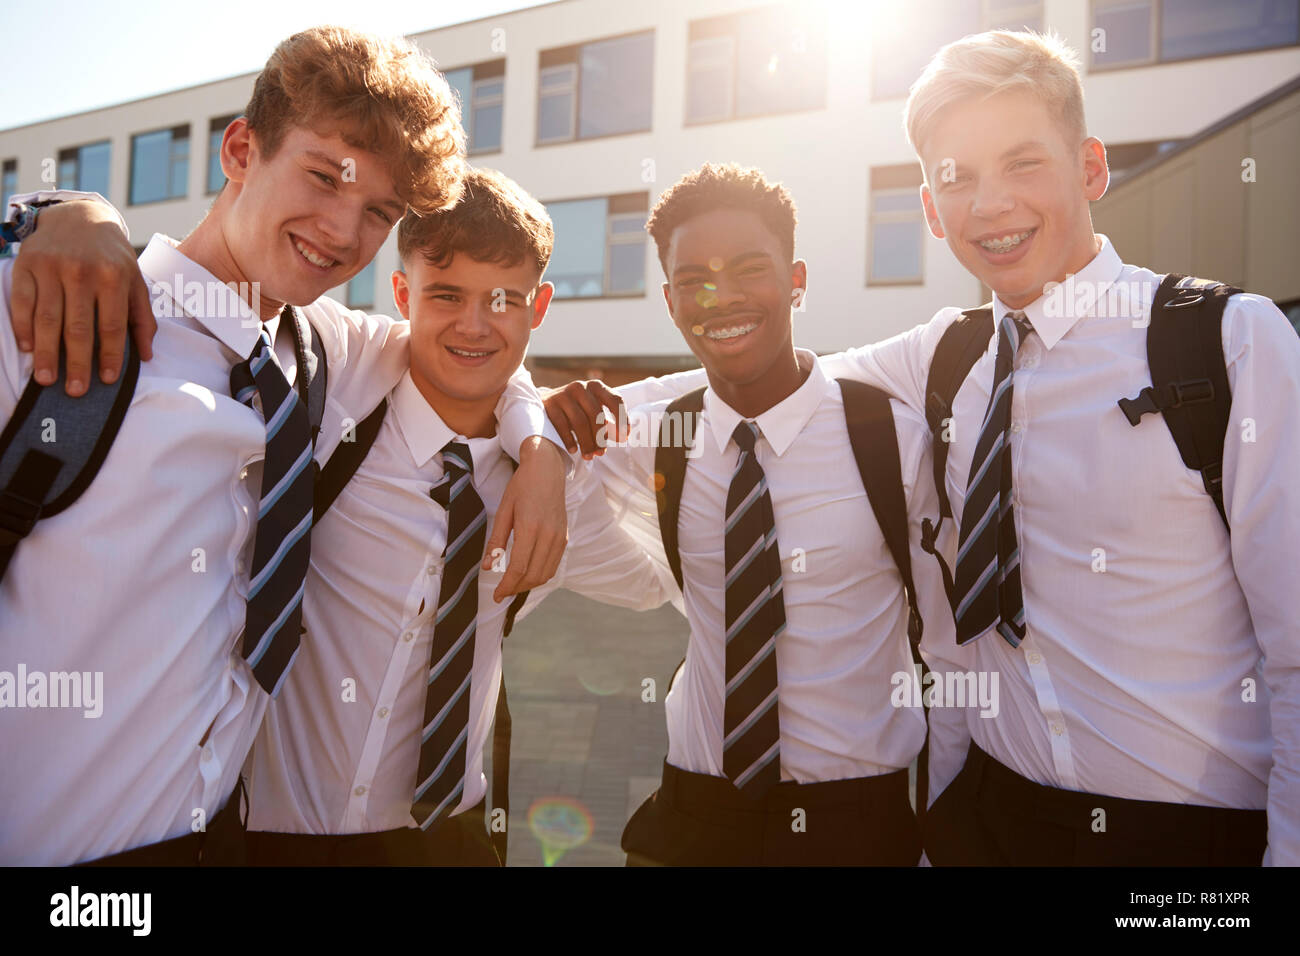 Portrait Of Smiling Male High School Students Wearing Uniform Outside College Building Stock Photo